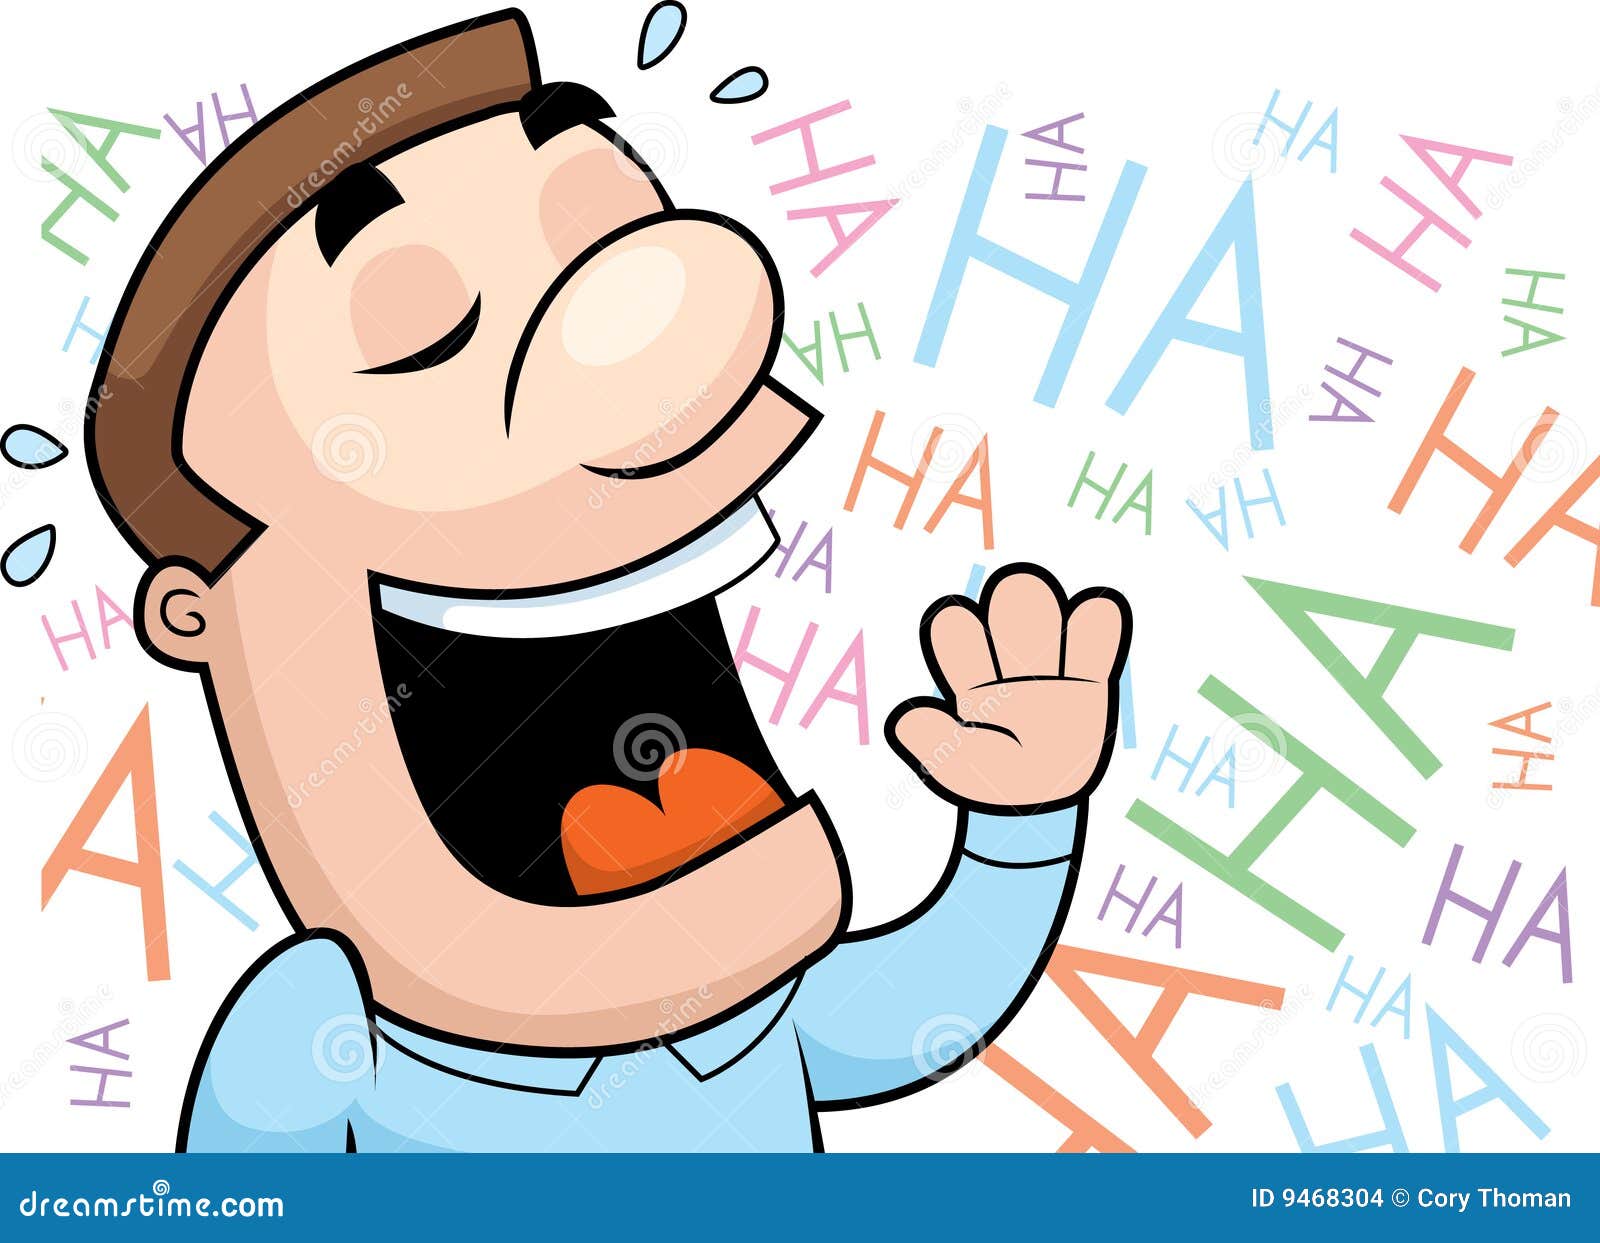 clipart laughter cartoon - photo #17